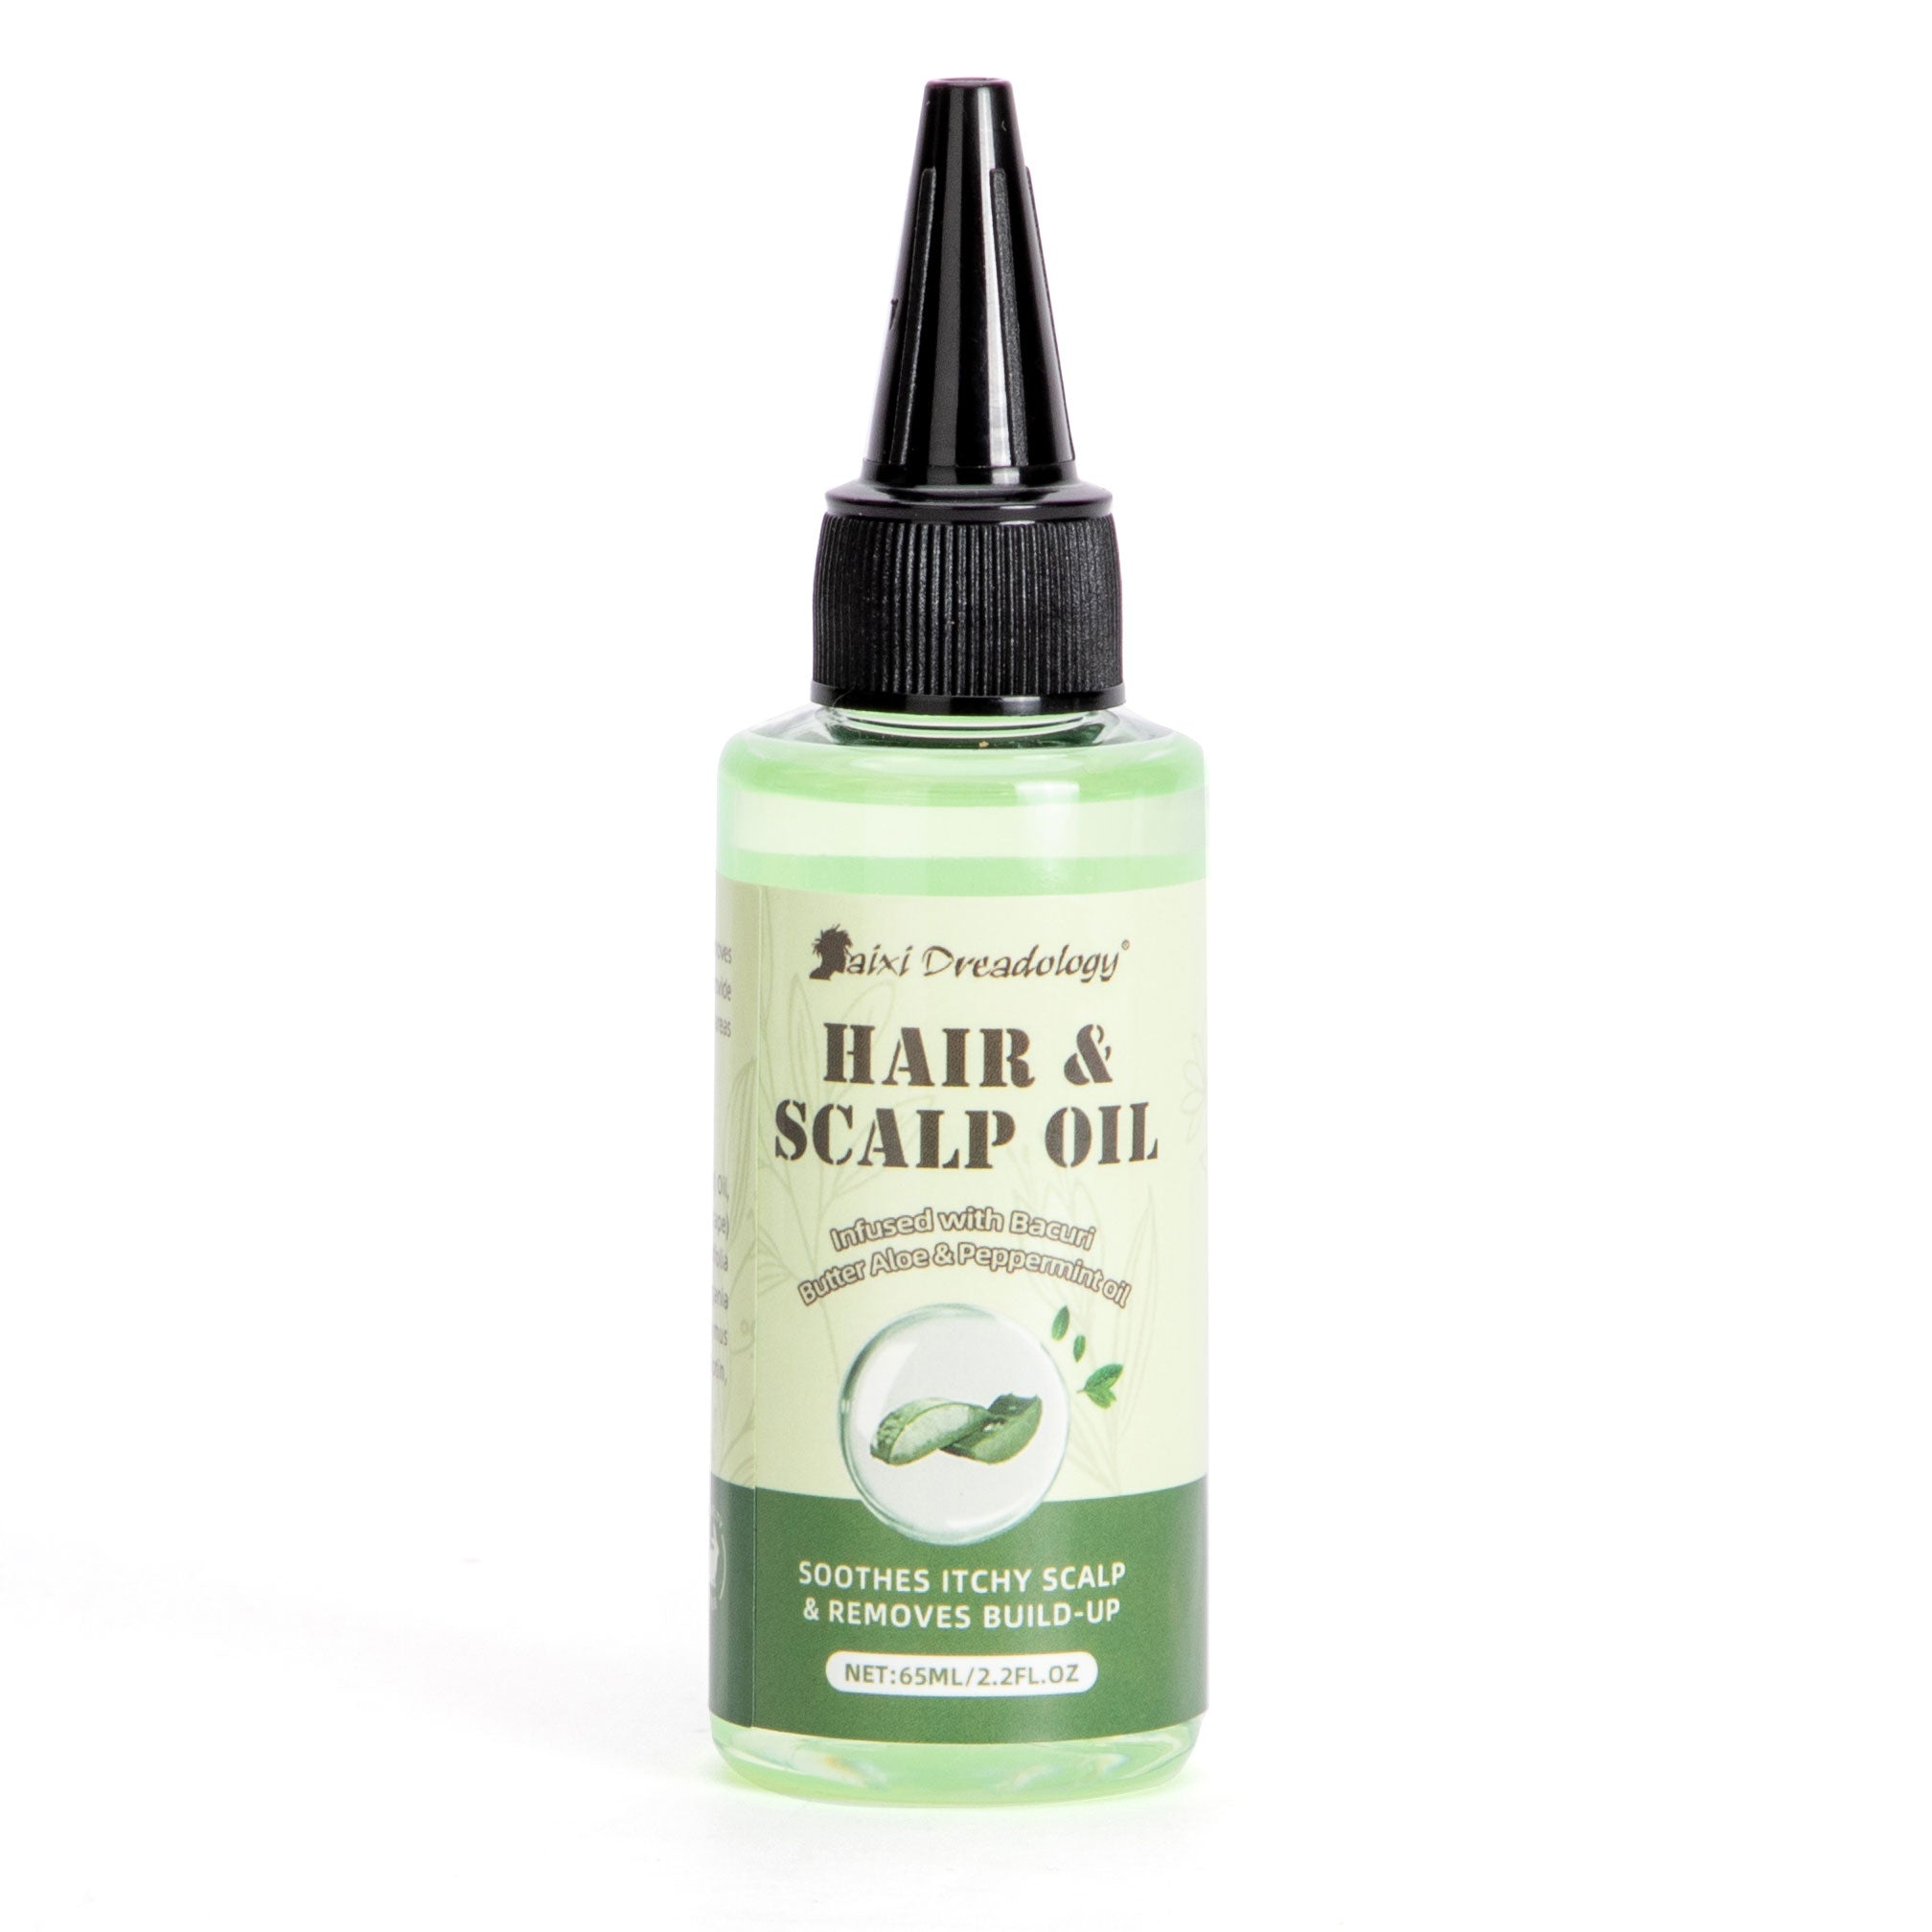 Daixi HAIR & SCALP OIL for All Hair Types, Soothes Itchy Scalp & Removes Build-up